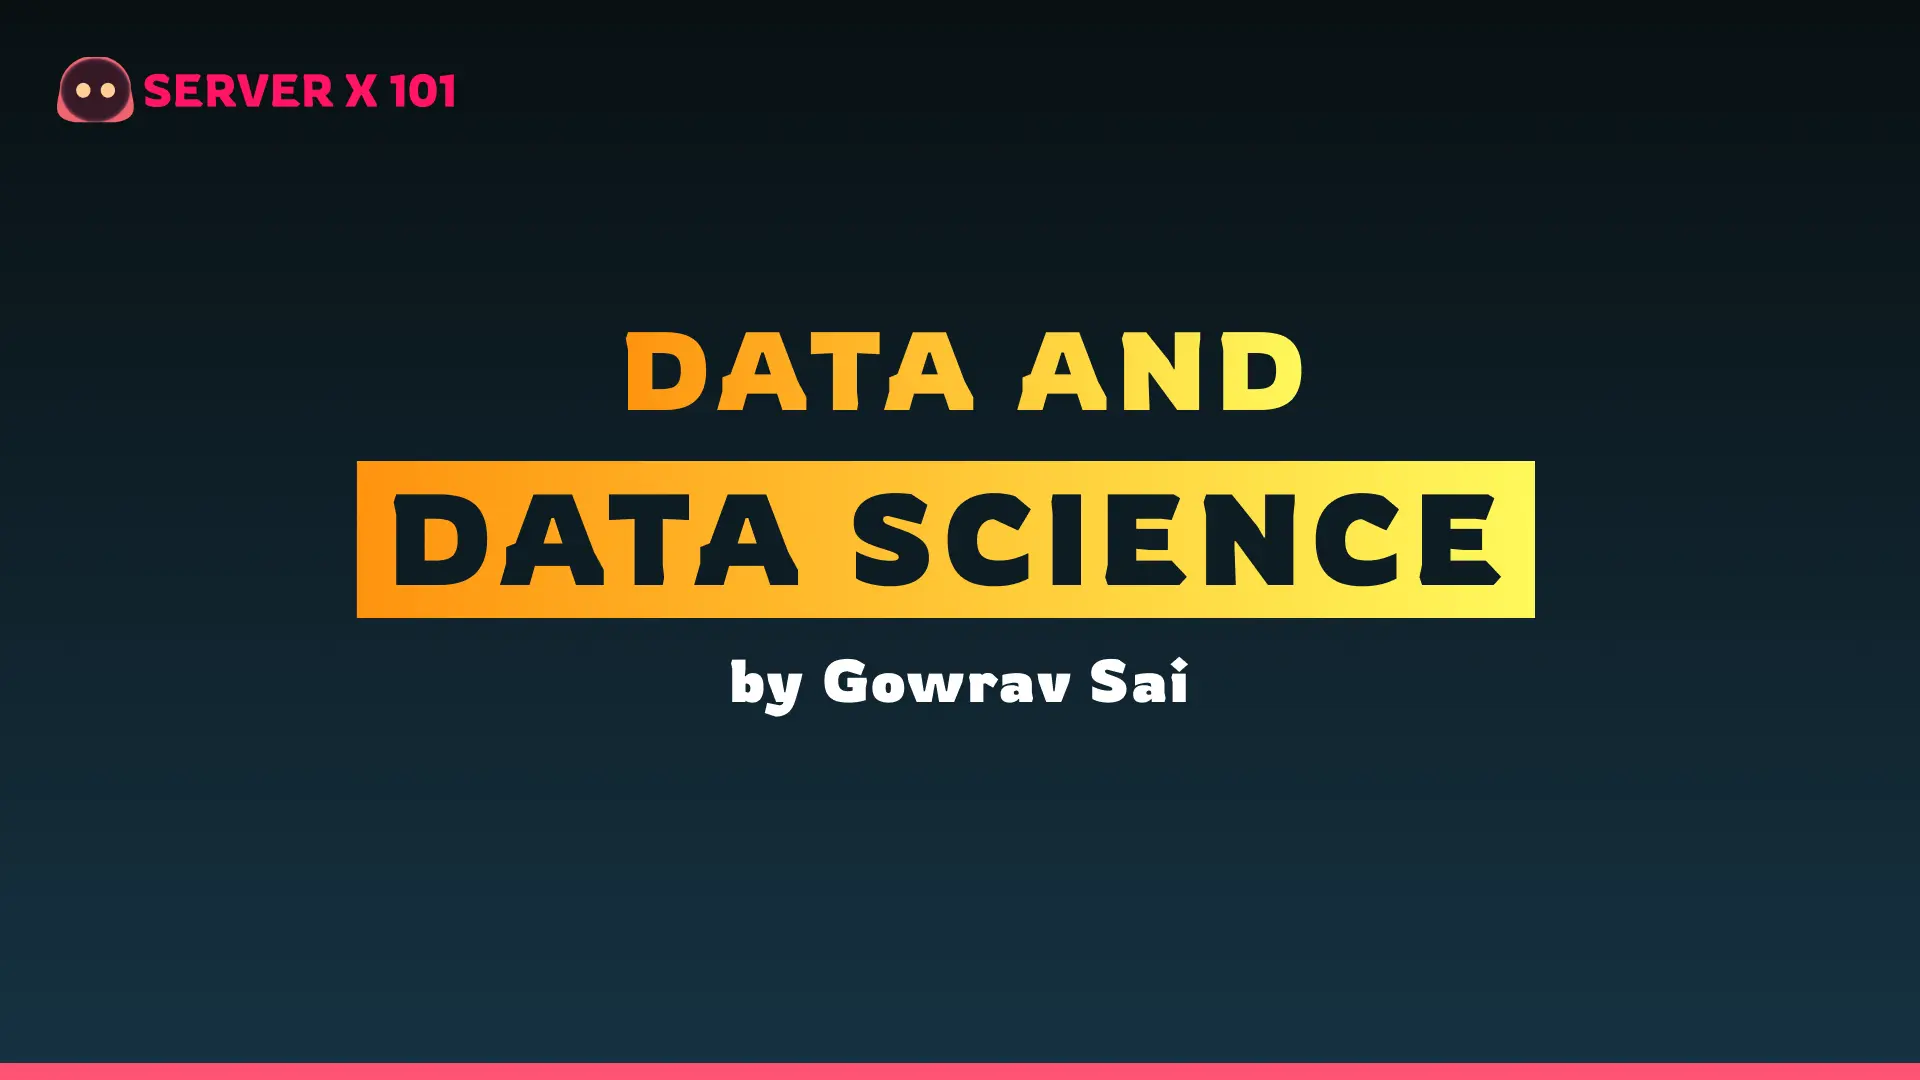 Data and Data Science